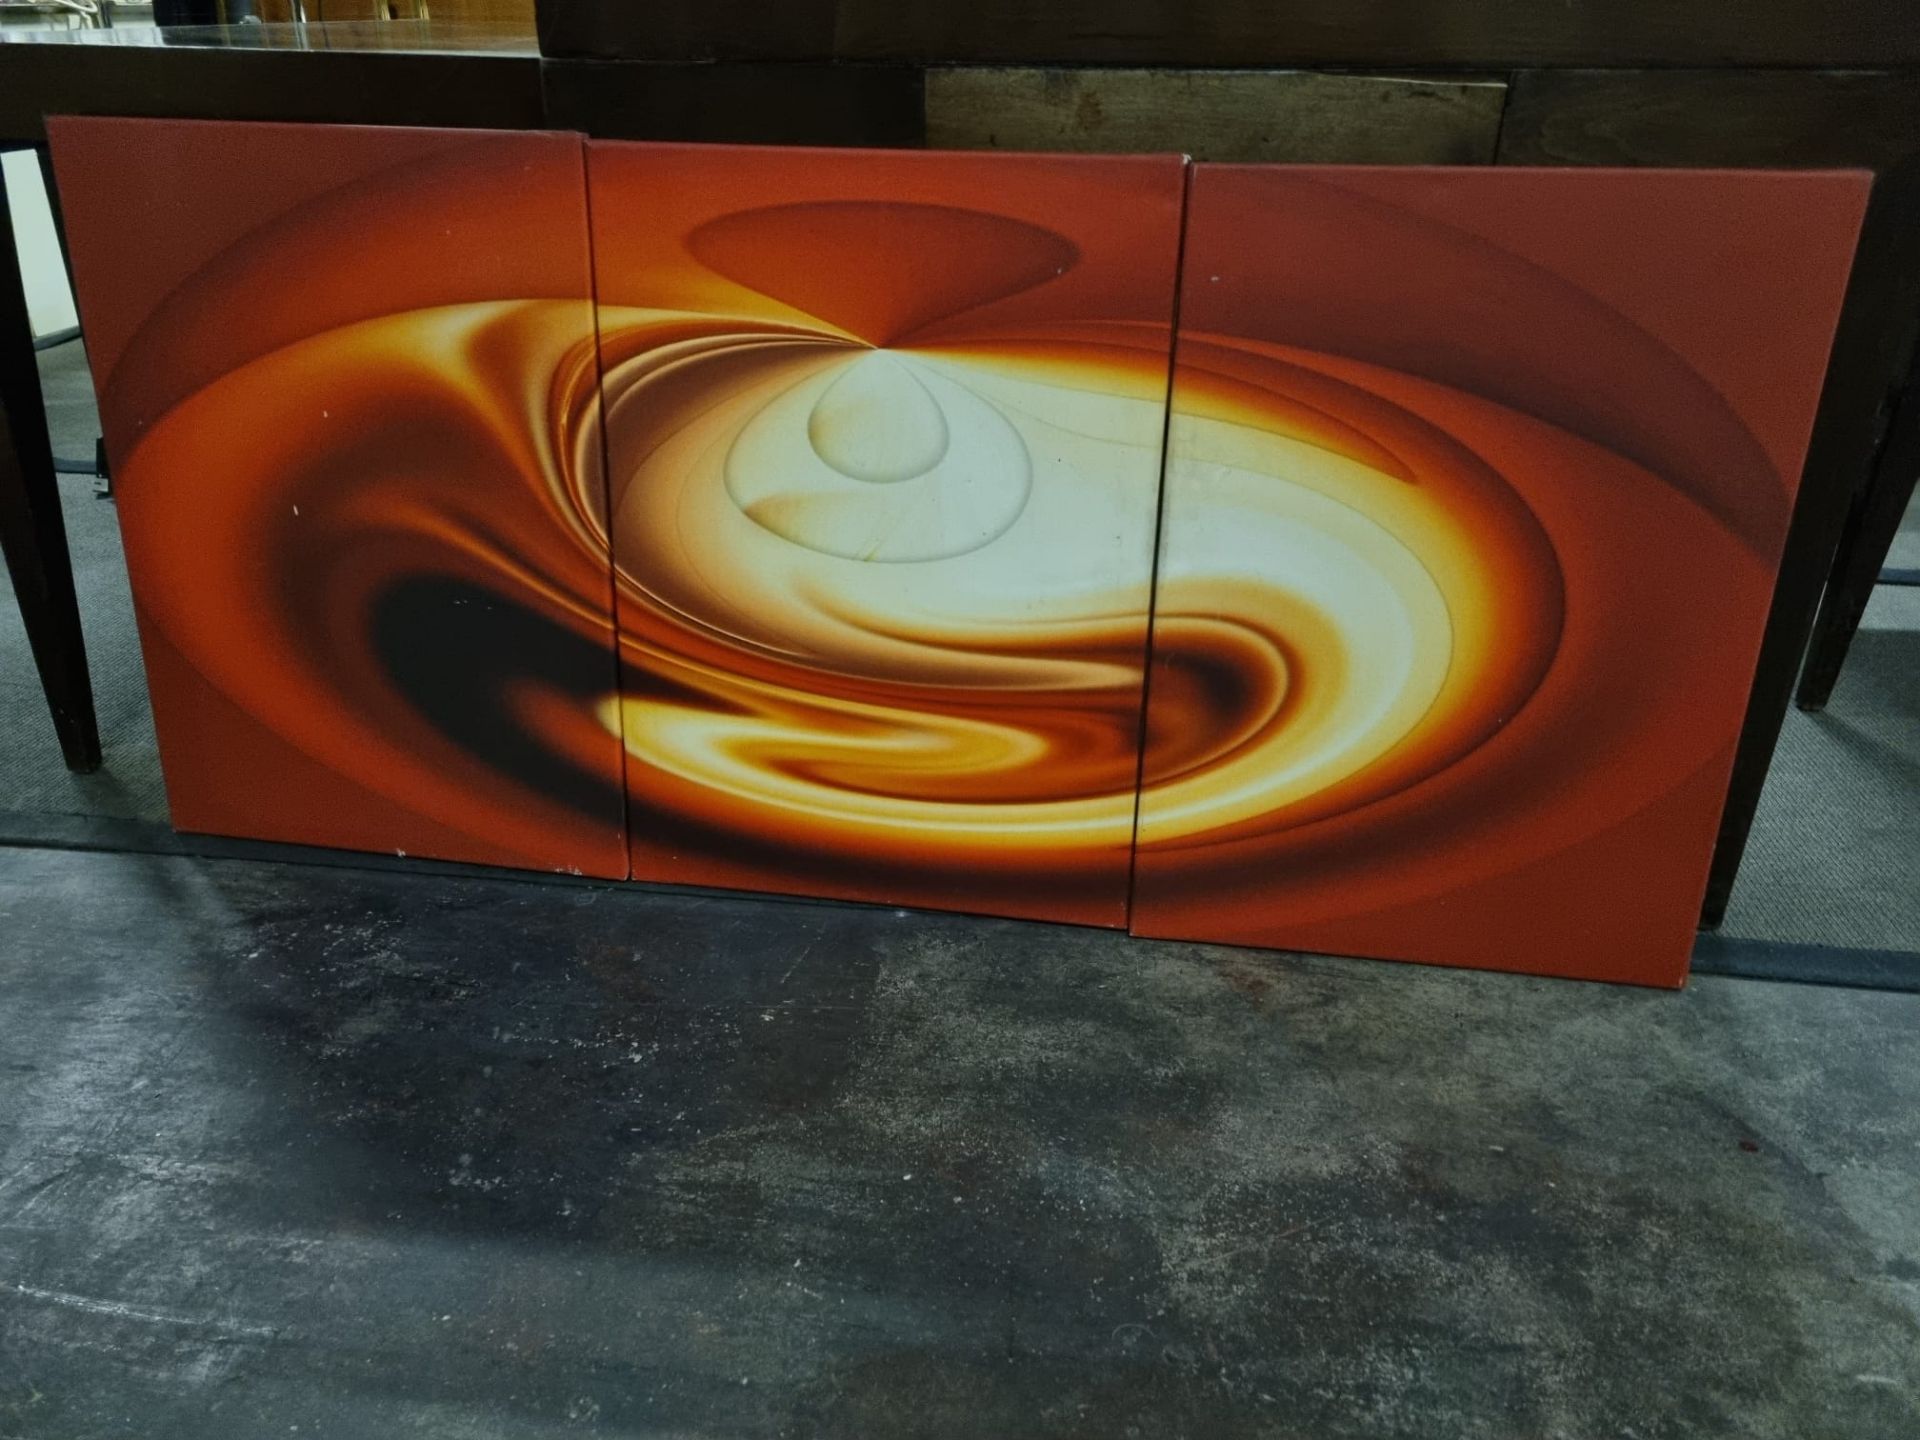 Red, Orange And White Swirl Abstract Art 3 Pieces Making One Piece 150 X 70cm